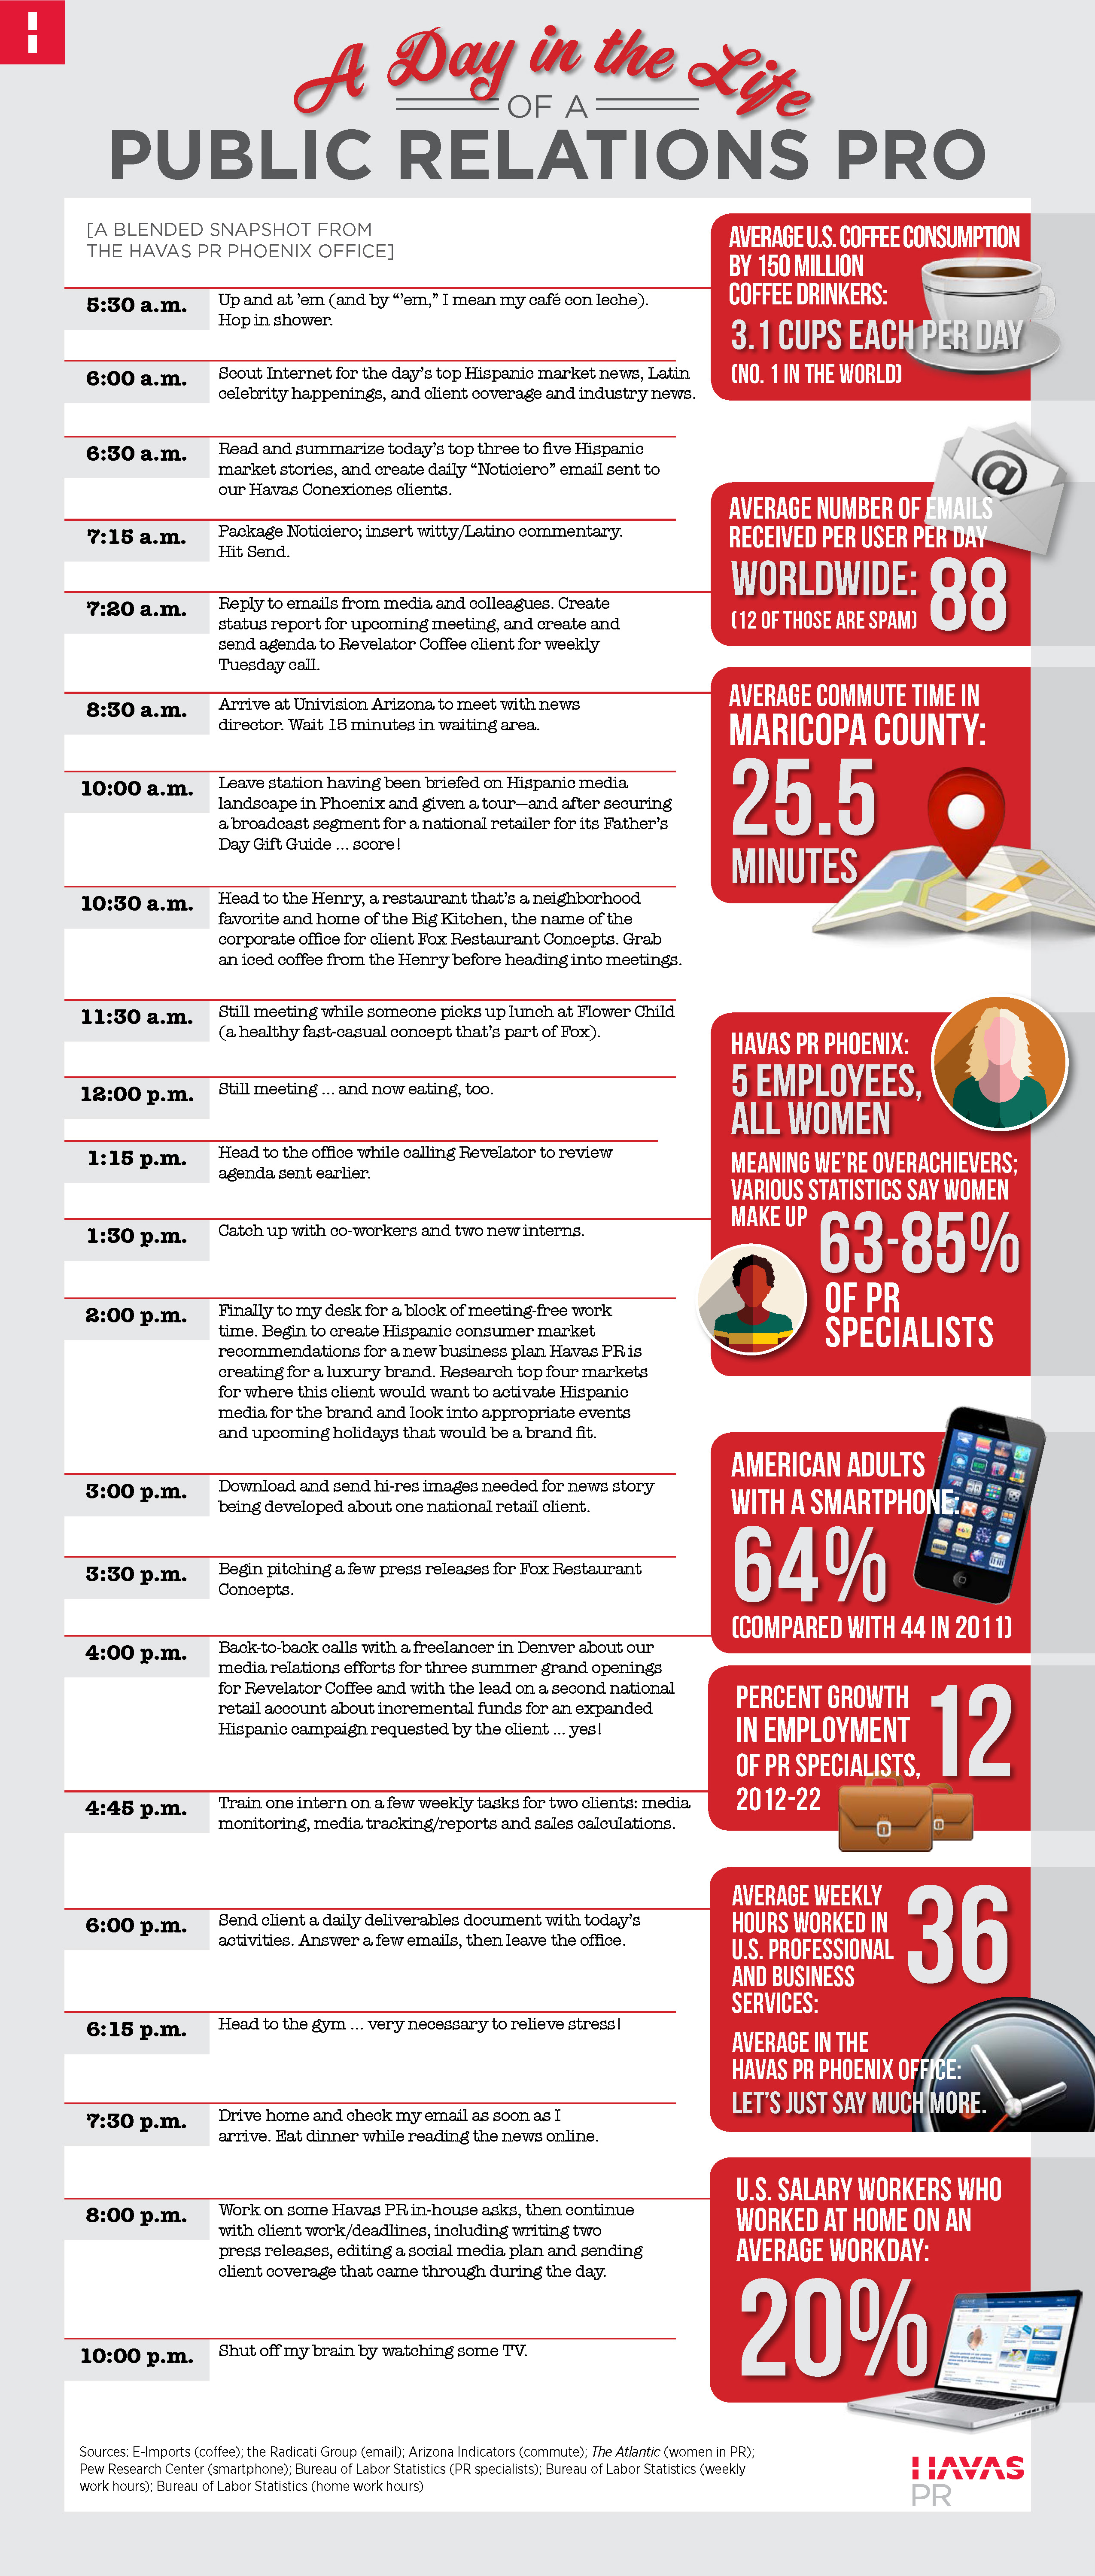 Havas PR Day in the Life infographic